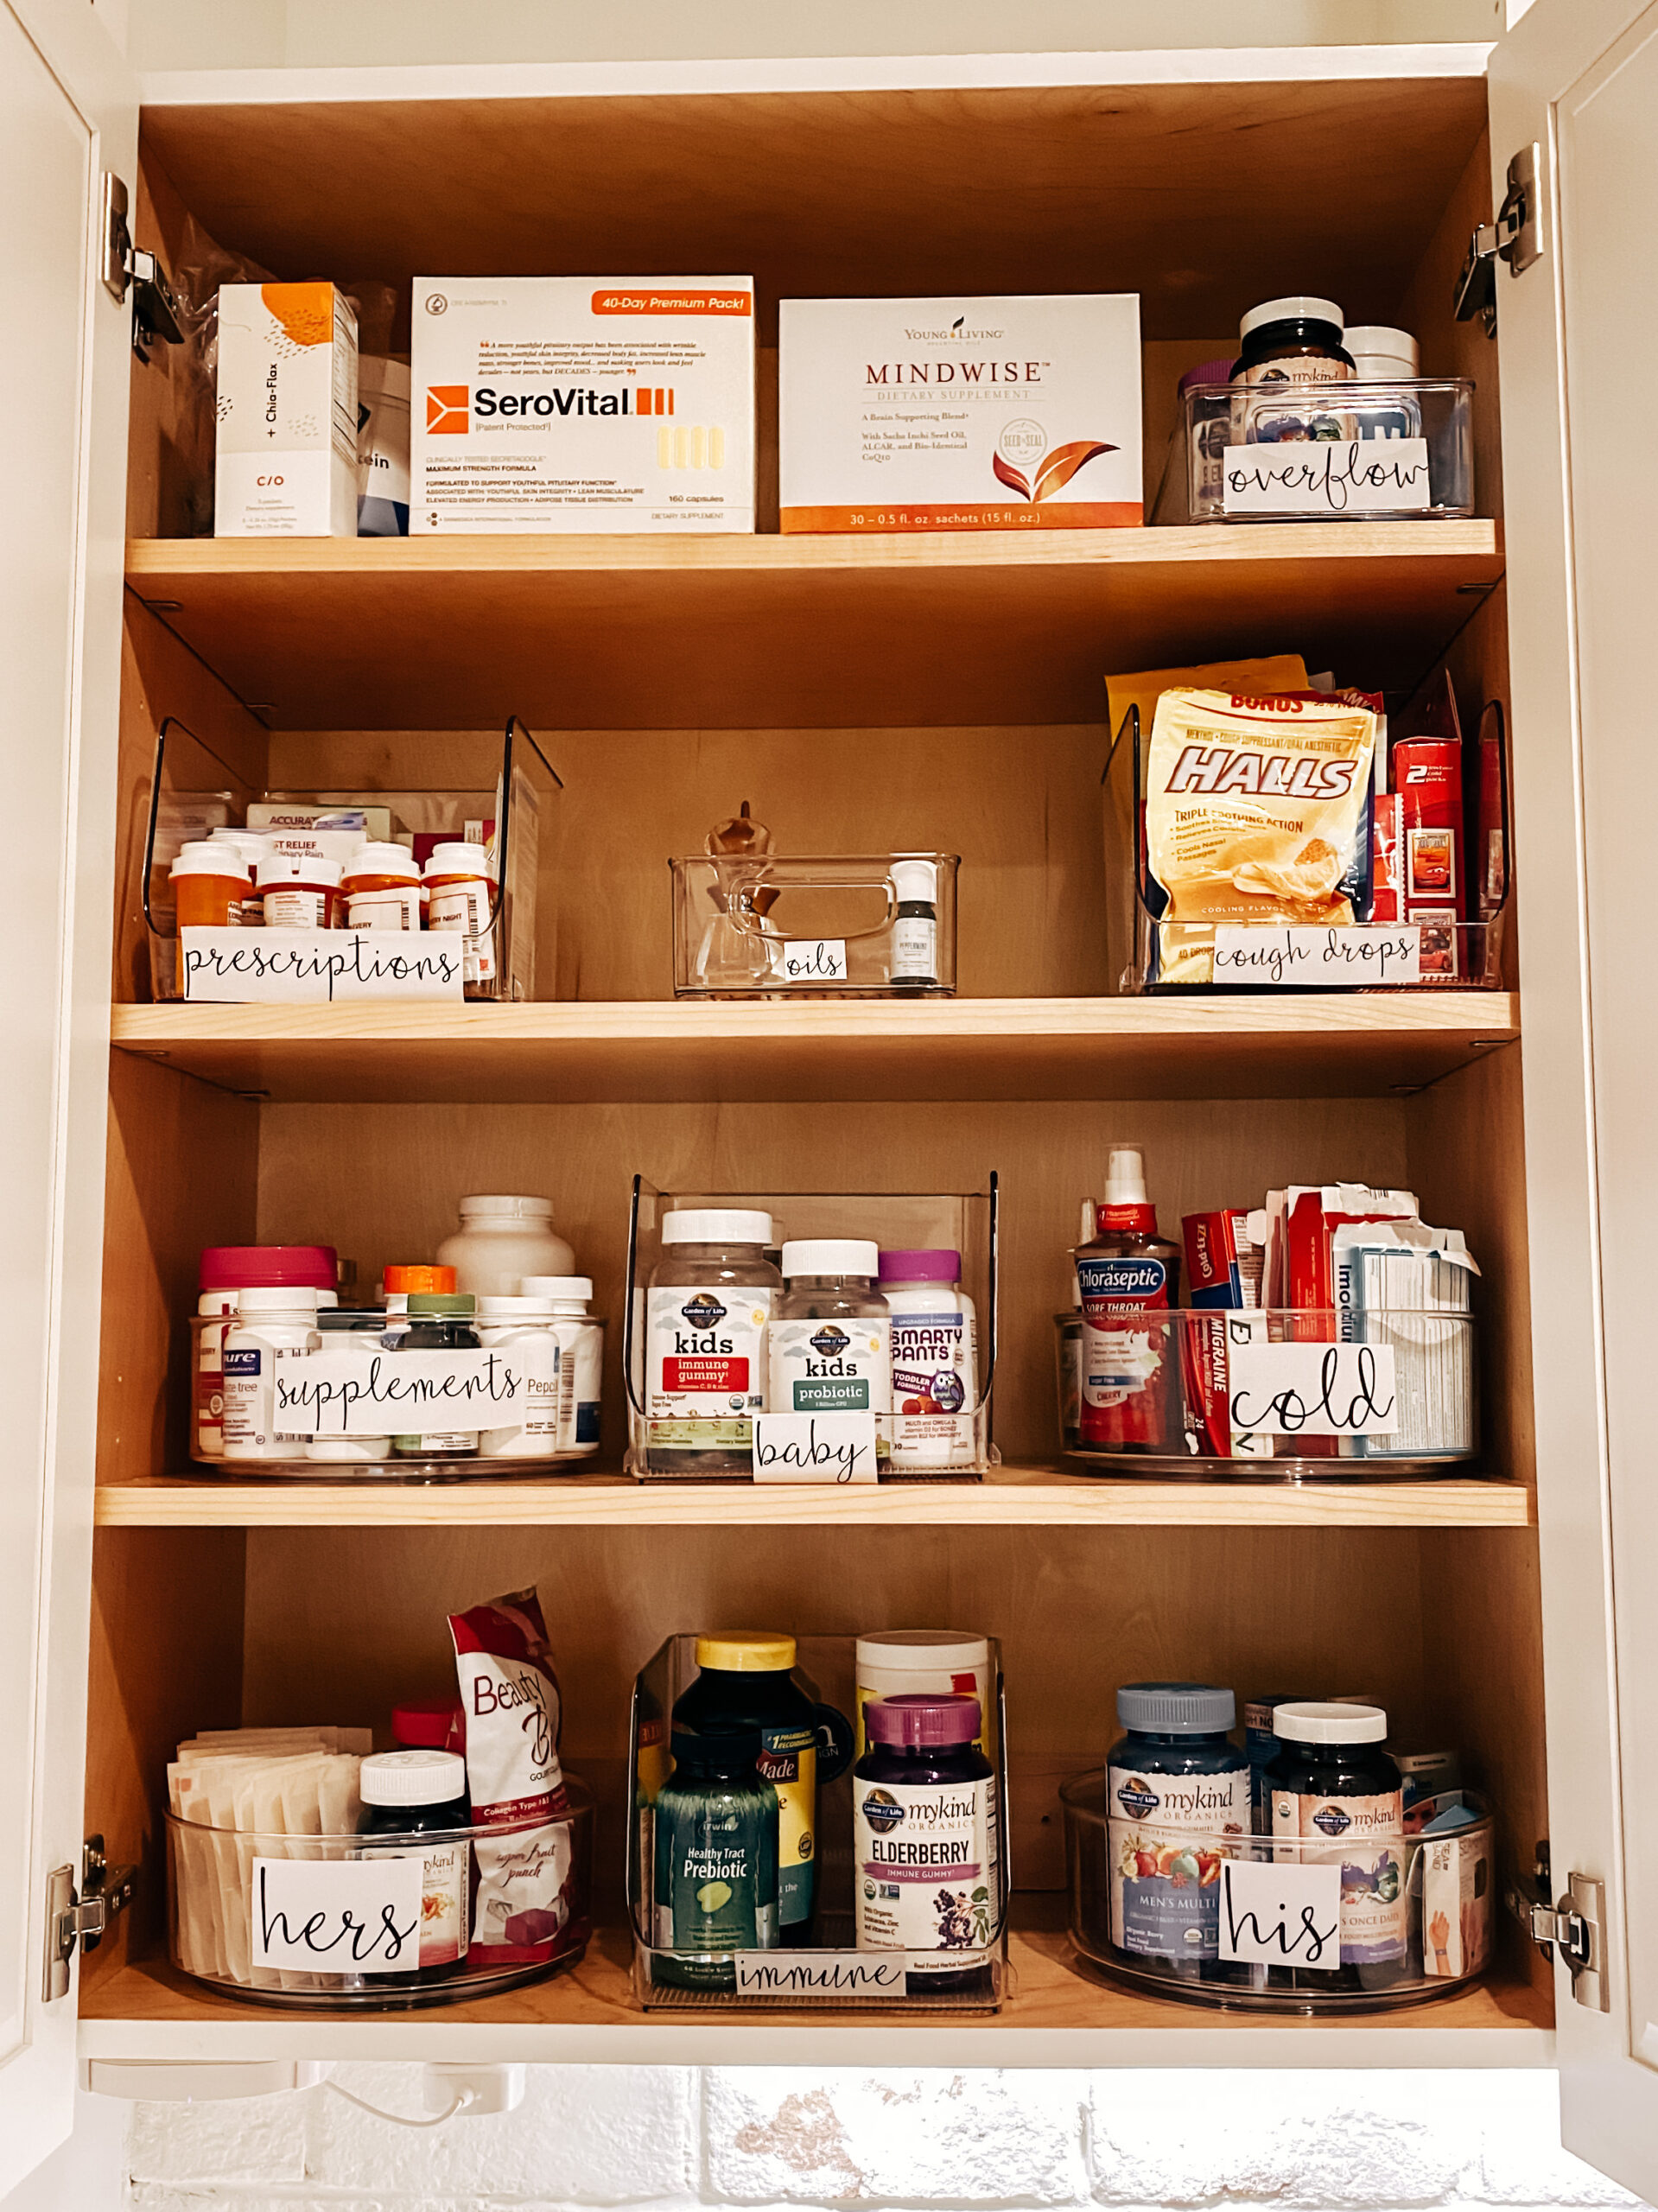 reSPACEd - I've organized a lot of medicine cabinets in my time as an  organizer, and I can honestly say that organizing them this way makes it  easiest to find what you